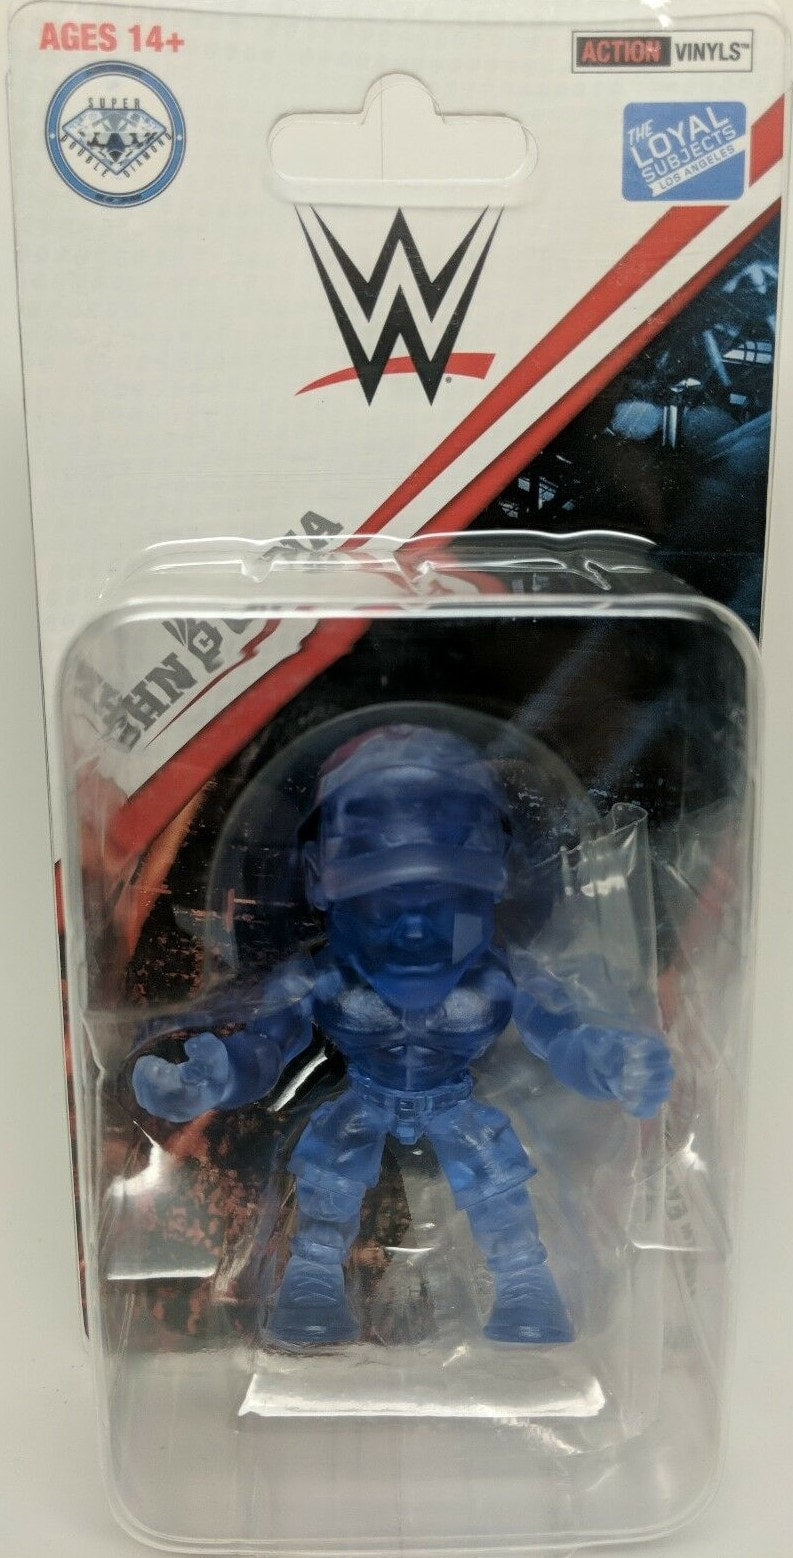 2018 WWE The Loyal Subjects Action Vinyls Exclusives John Cena [Exclusive, Clear Blue Edition]